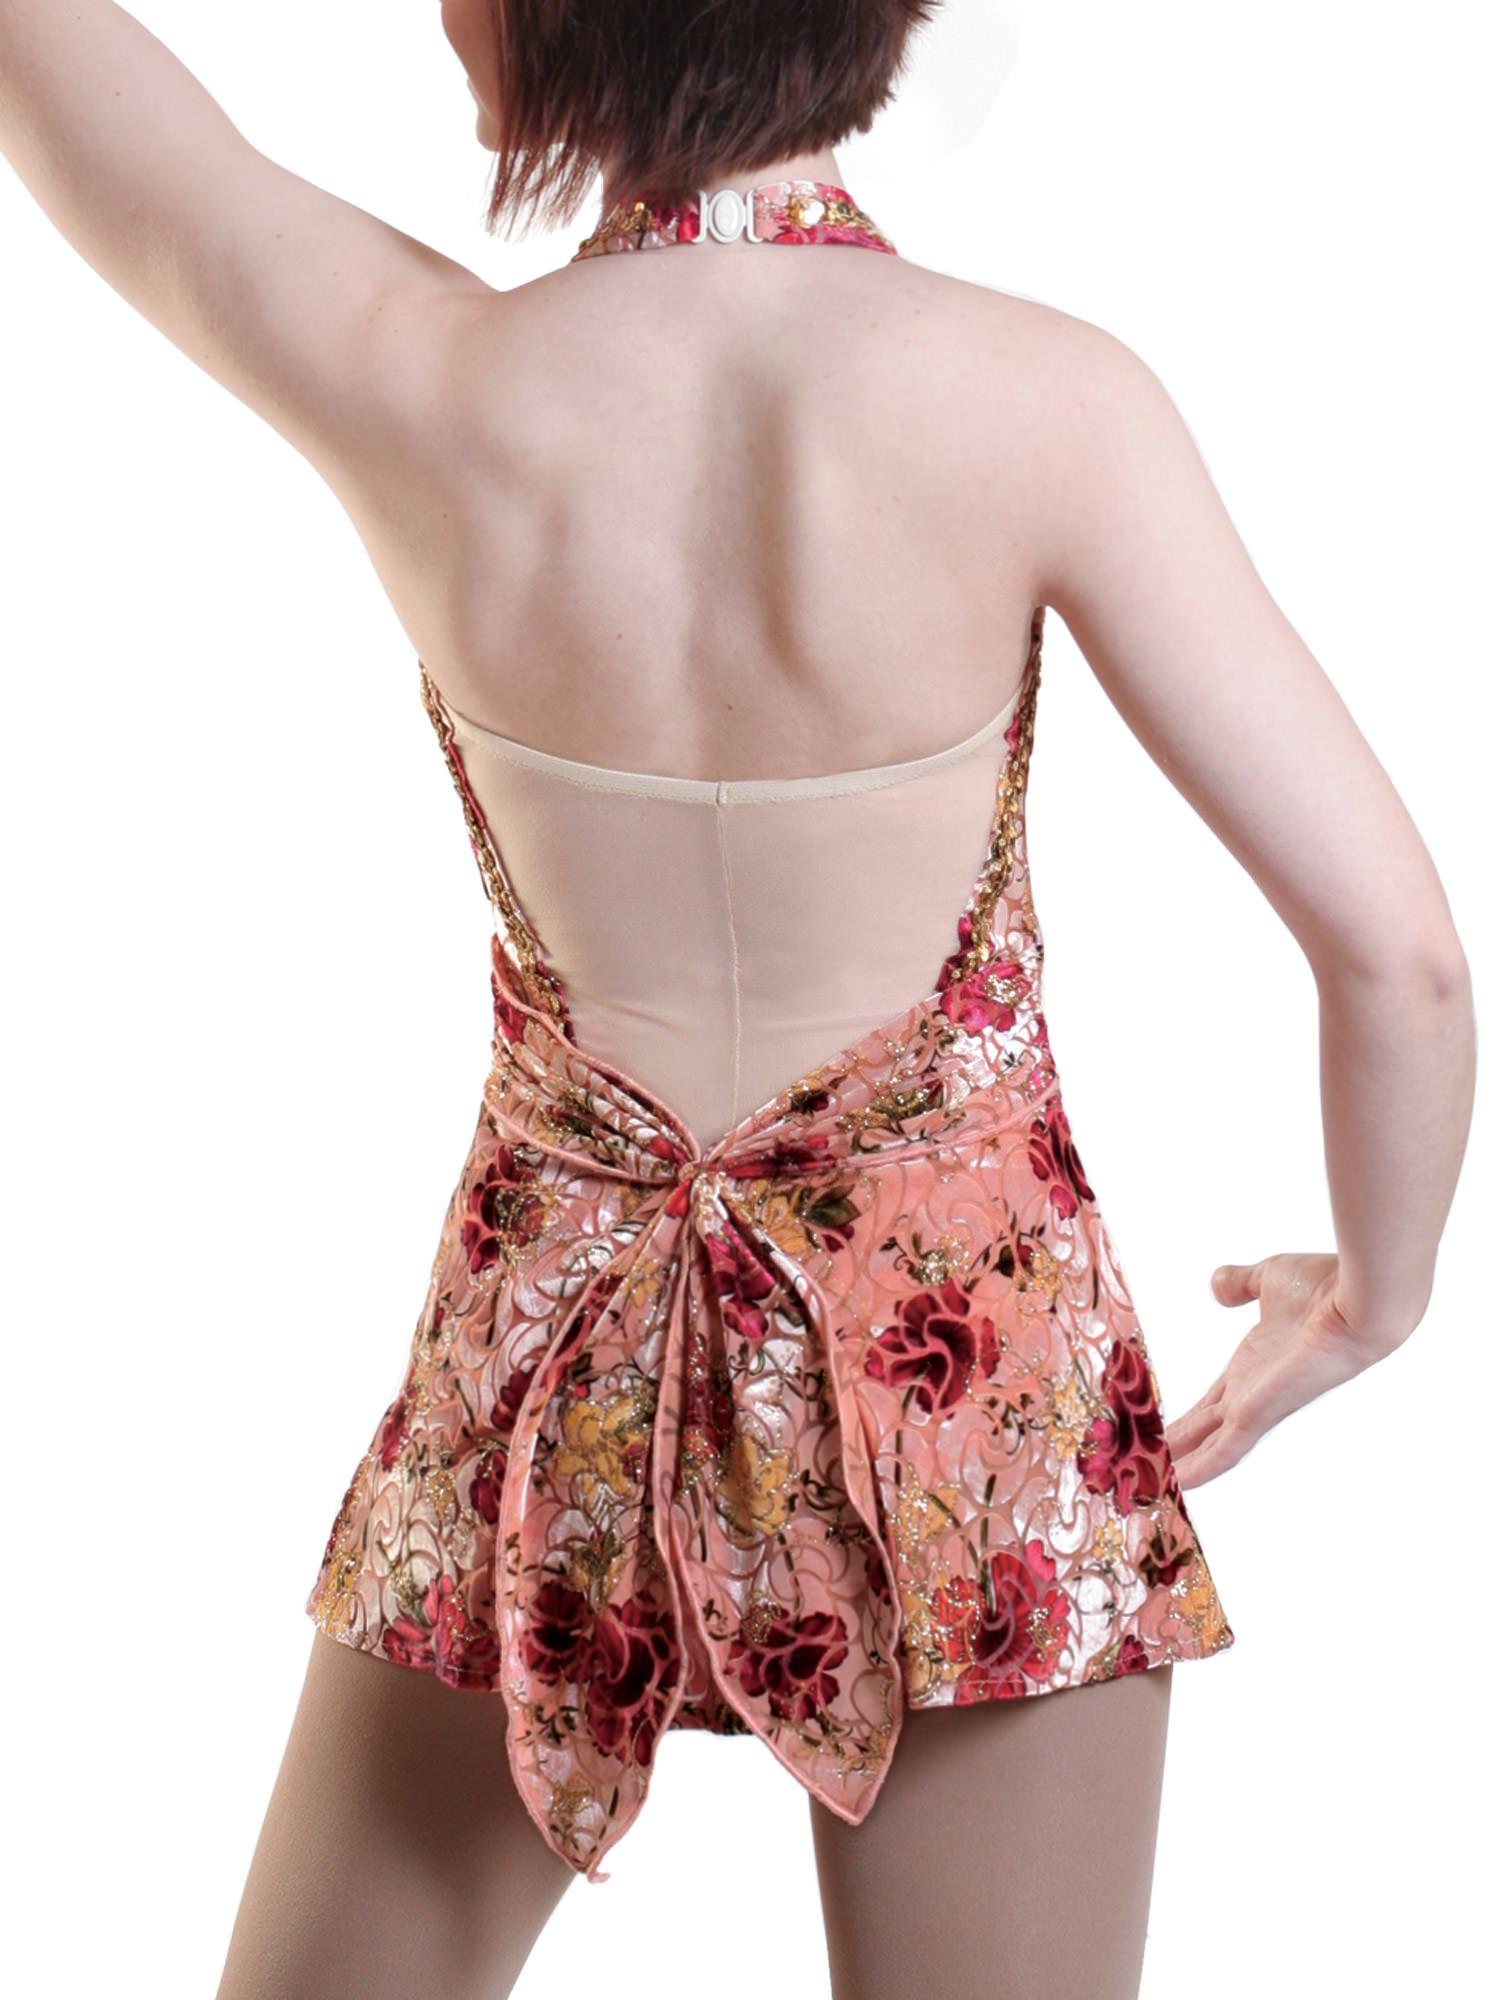 Jalie 2790 - Crossover Halter Skating Dress Pattern (with sash and open back illusion)